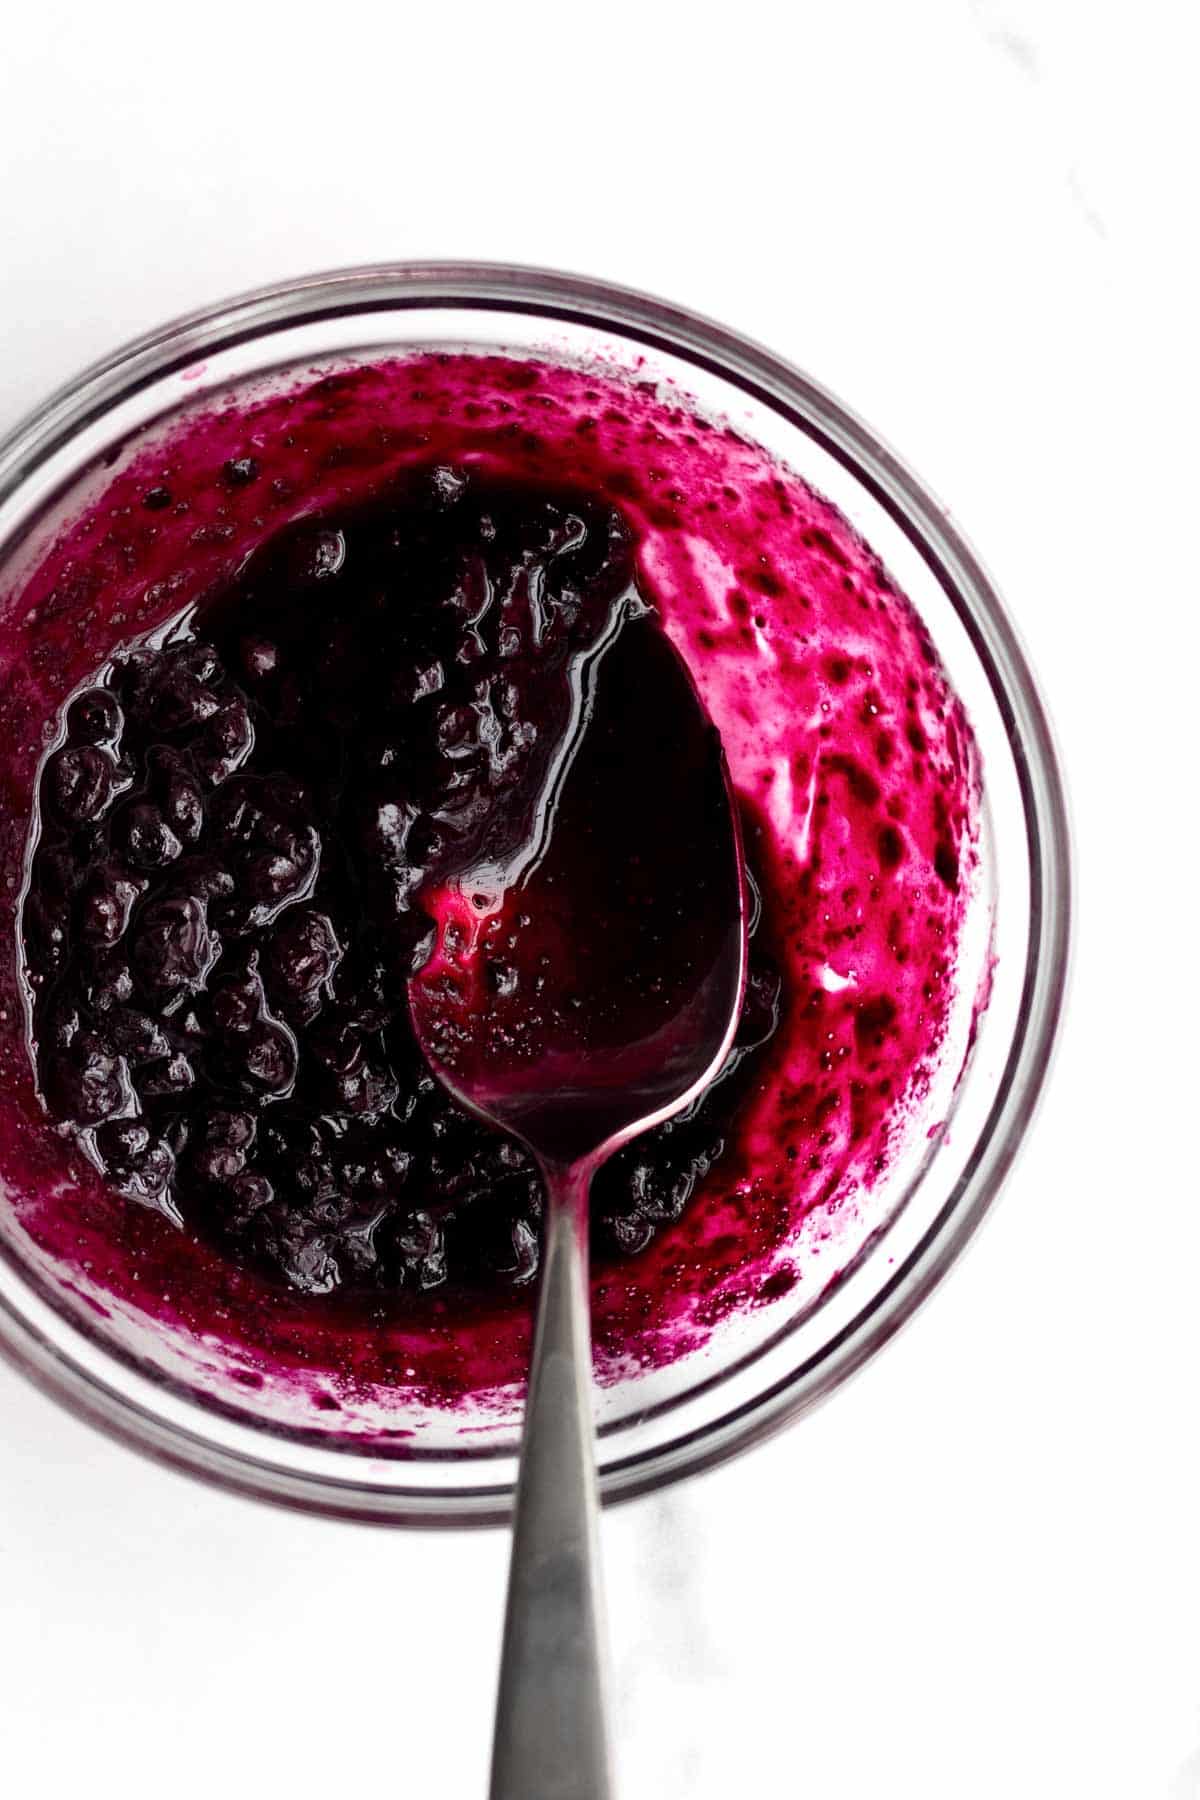 Heated blueberries stain the sides of the bowl in a magenta hue.